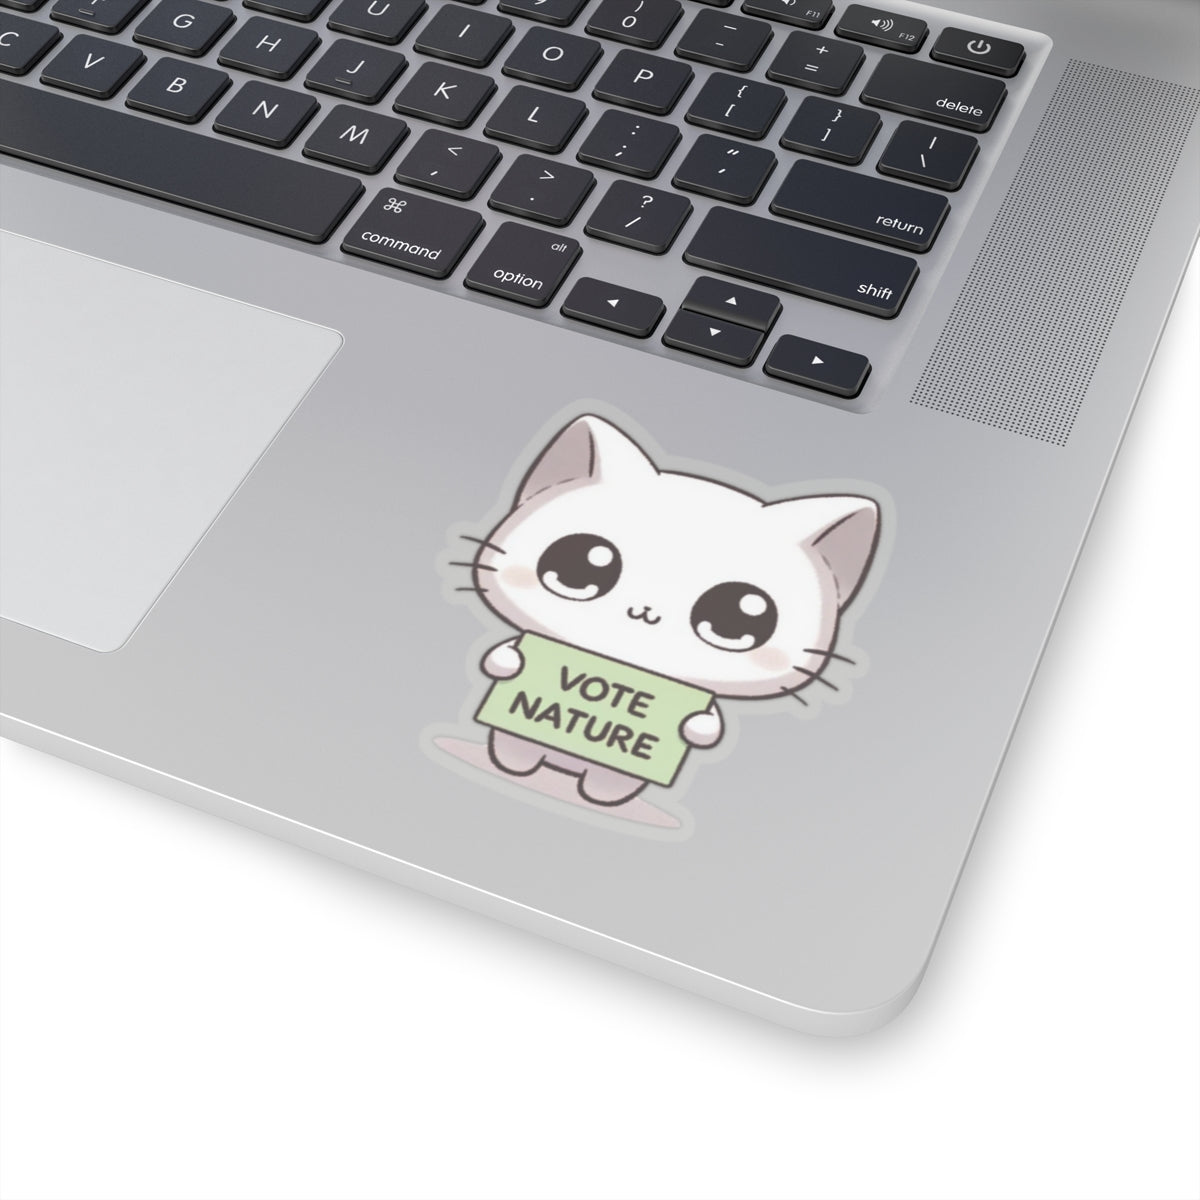 Inspirational Cute Cat Statement vinyl Sticker: Vote Nature! for laptop, kindle, phone, ipad, instrument case, notebook, mood board, or wall